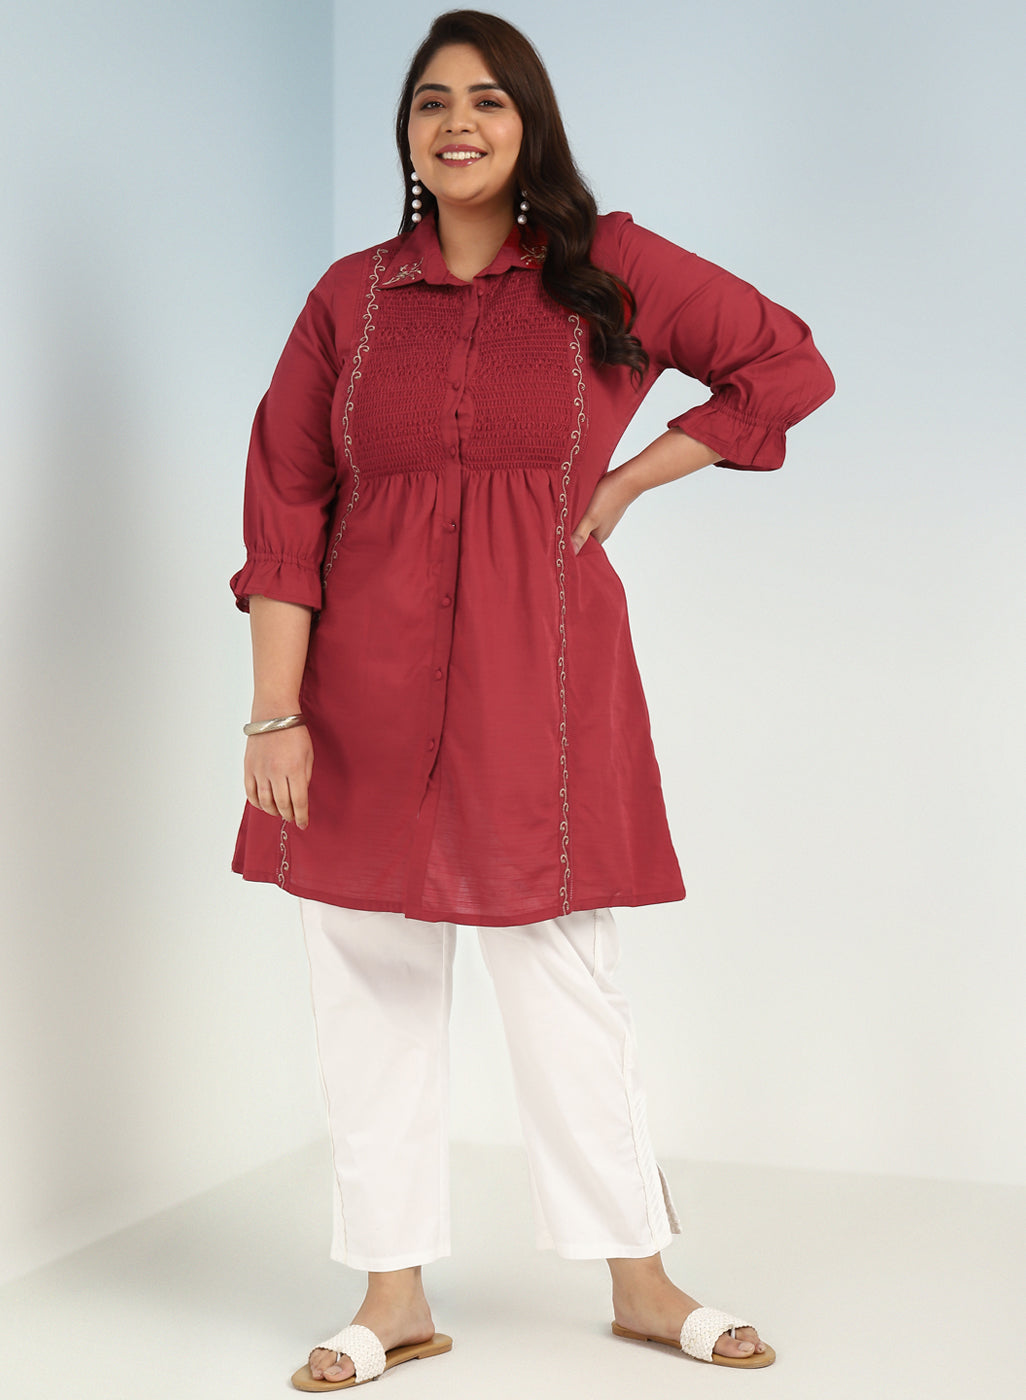 Ritsila Women Stylish Cotton In Marron Color In Tops at Rs 499.00, Ladies Cotton  Tops, Cotton Long Tops, महिलाओं के सूती टॉप - Vool Fashion, Surat